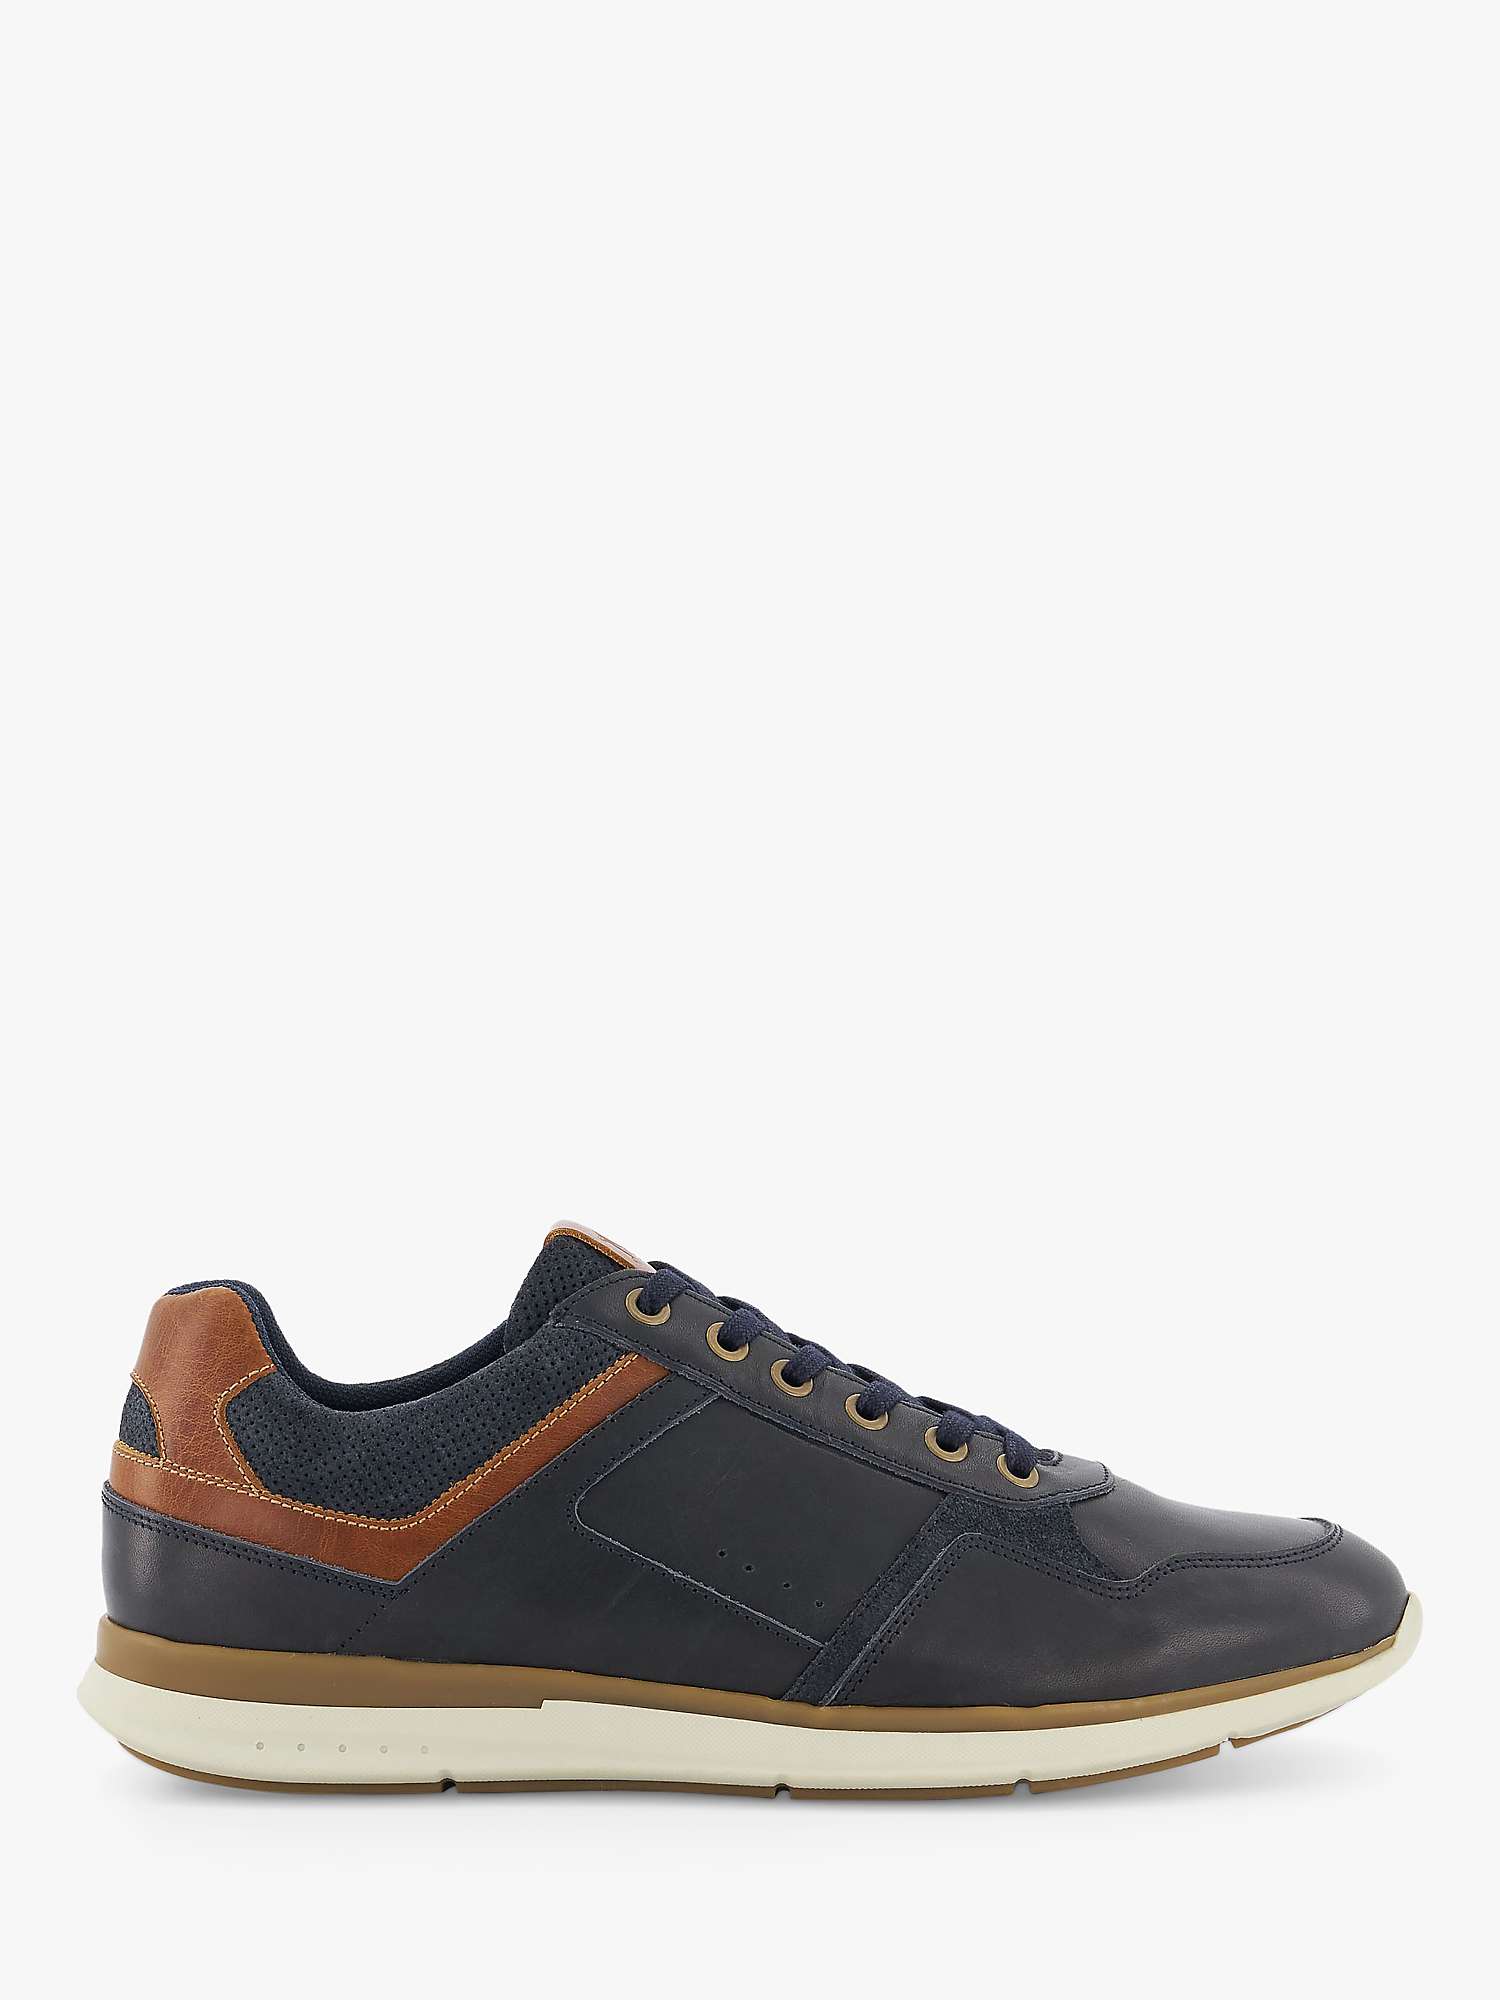 Dune Trended Leather Lace Up Trainers, Navy at John Lewis & Partners